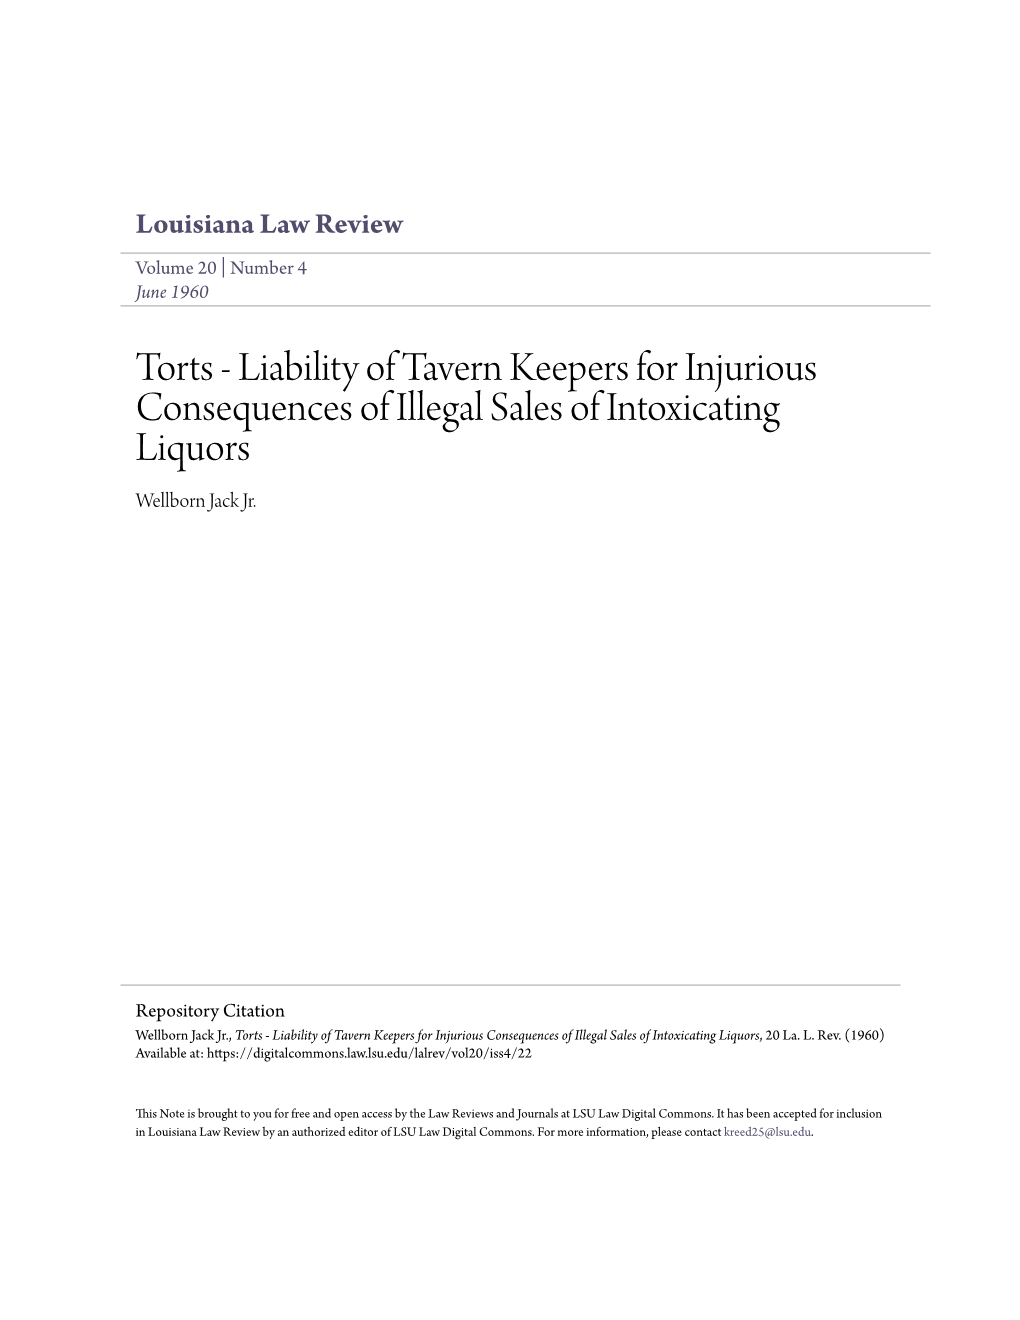 Torts - Liability of Tavern Keepers for Injurious Consequences of Illegal Sales of Intoxicating Liquors Wellborn Jack Jr